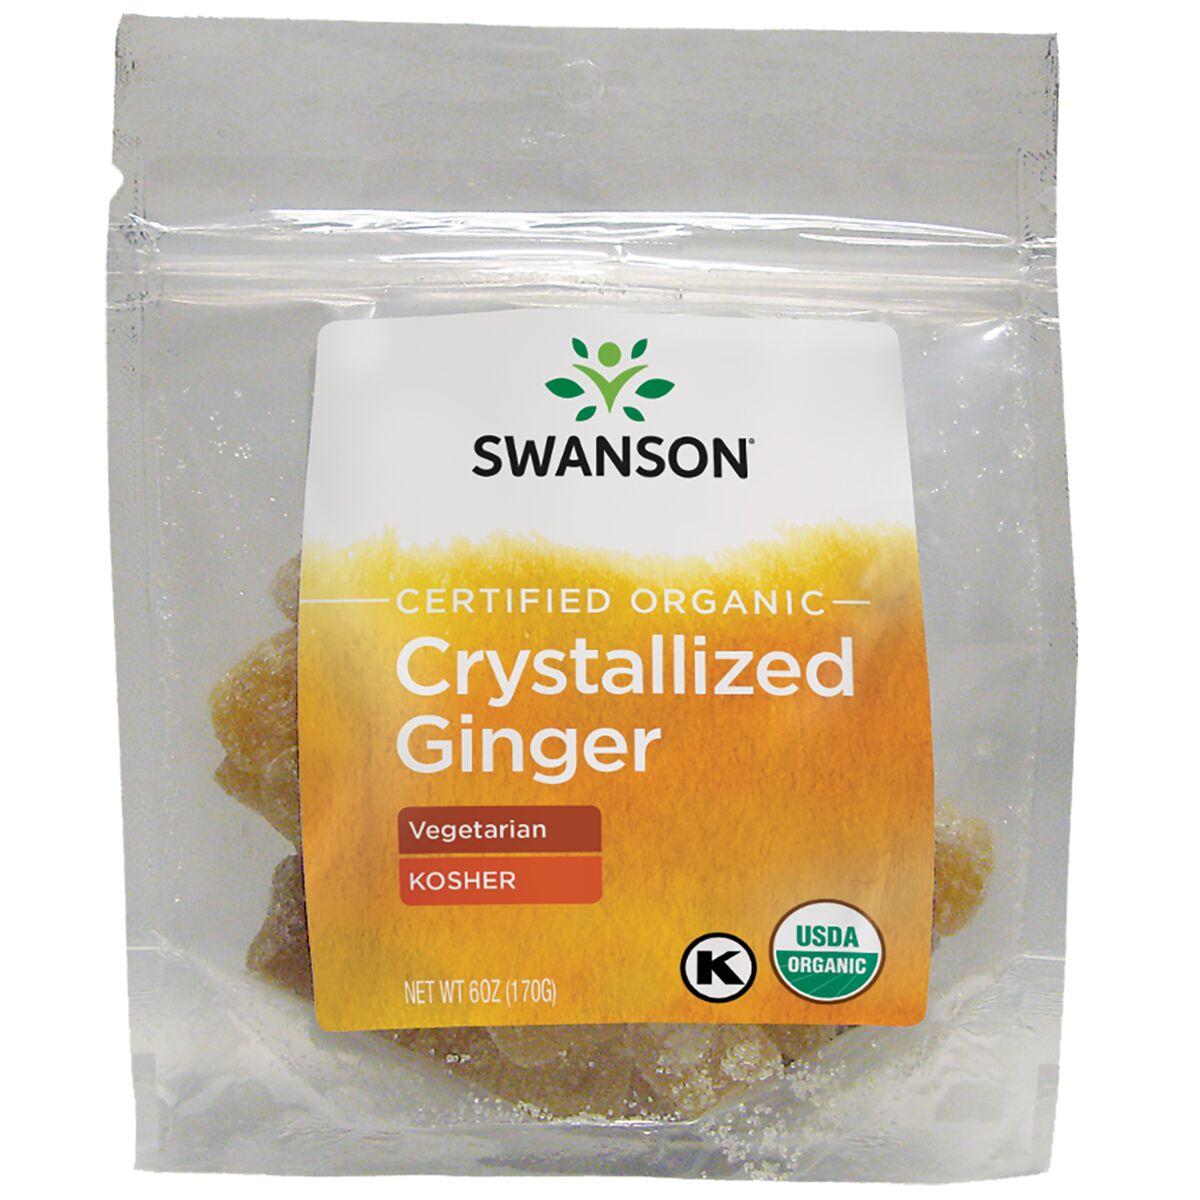 Swanson Organic Certified Crystallized Ginger | 6 oz Package